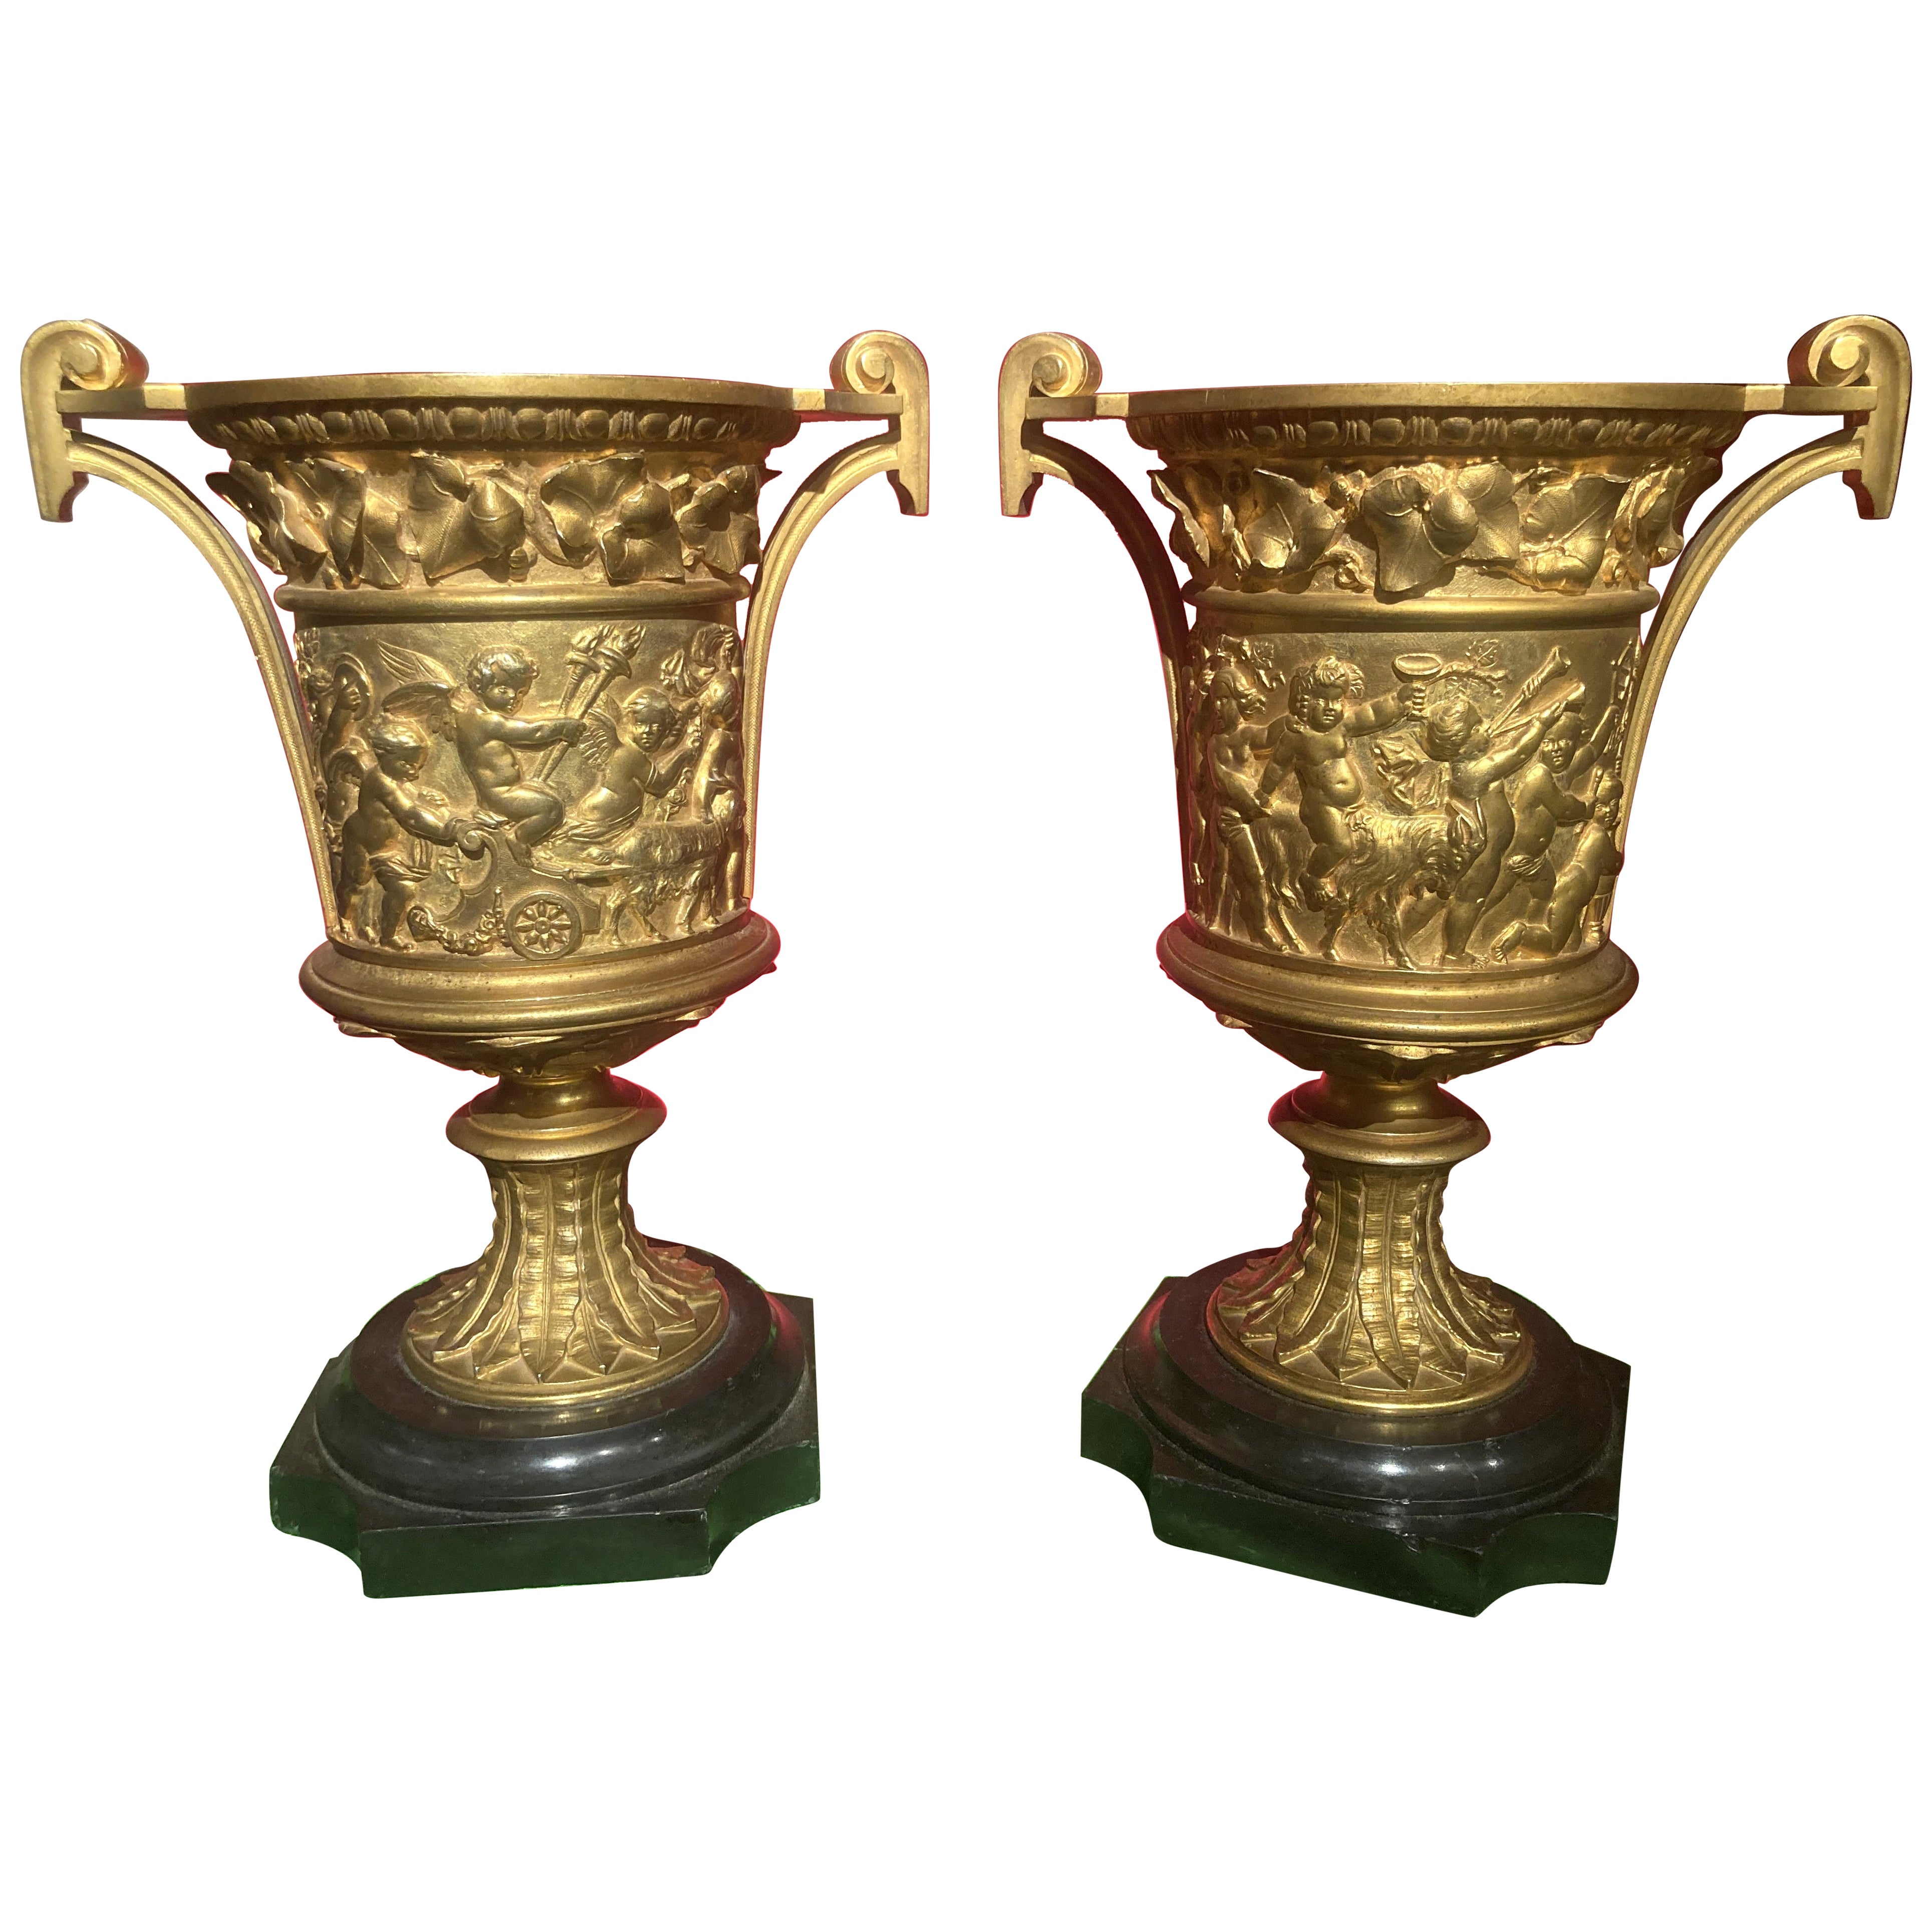 French 18th Century Louis XVI Ormolu Handled Vases, Relief Putto on Marble Base For Sale